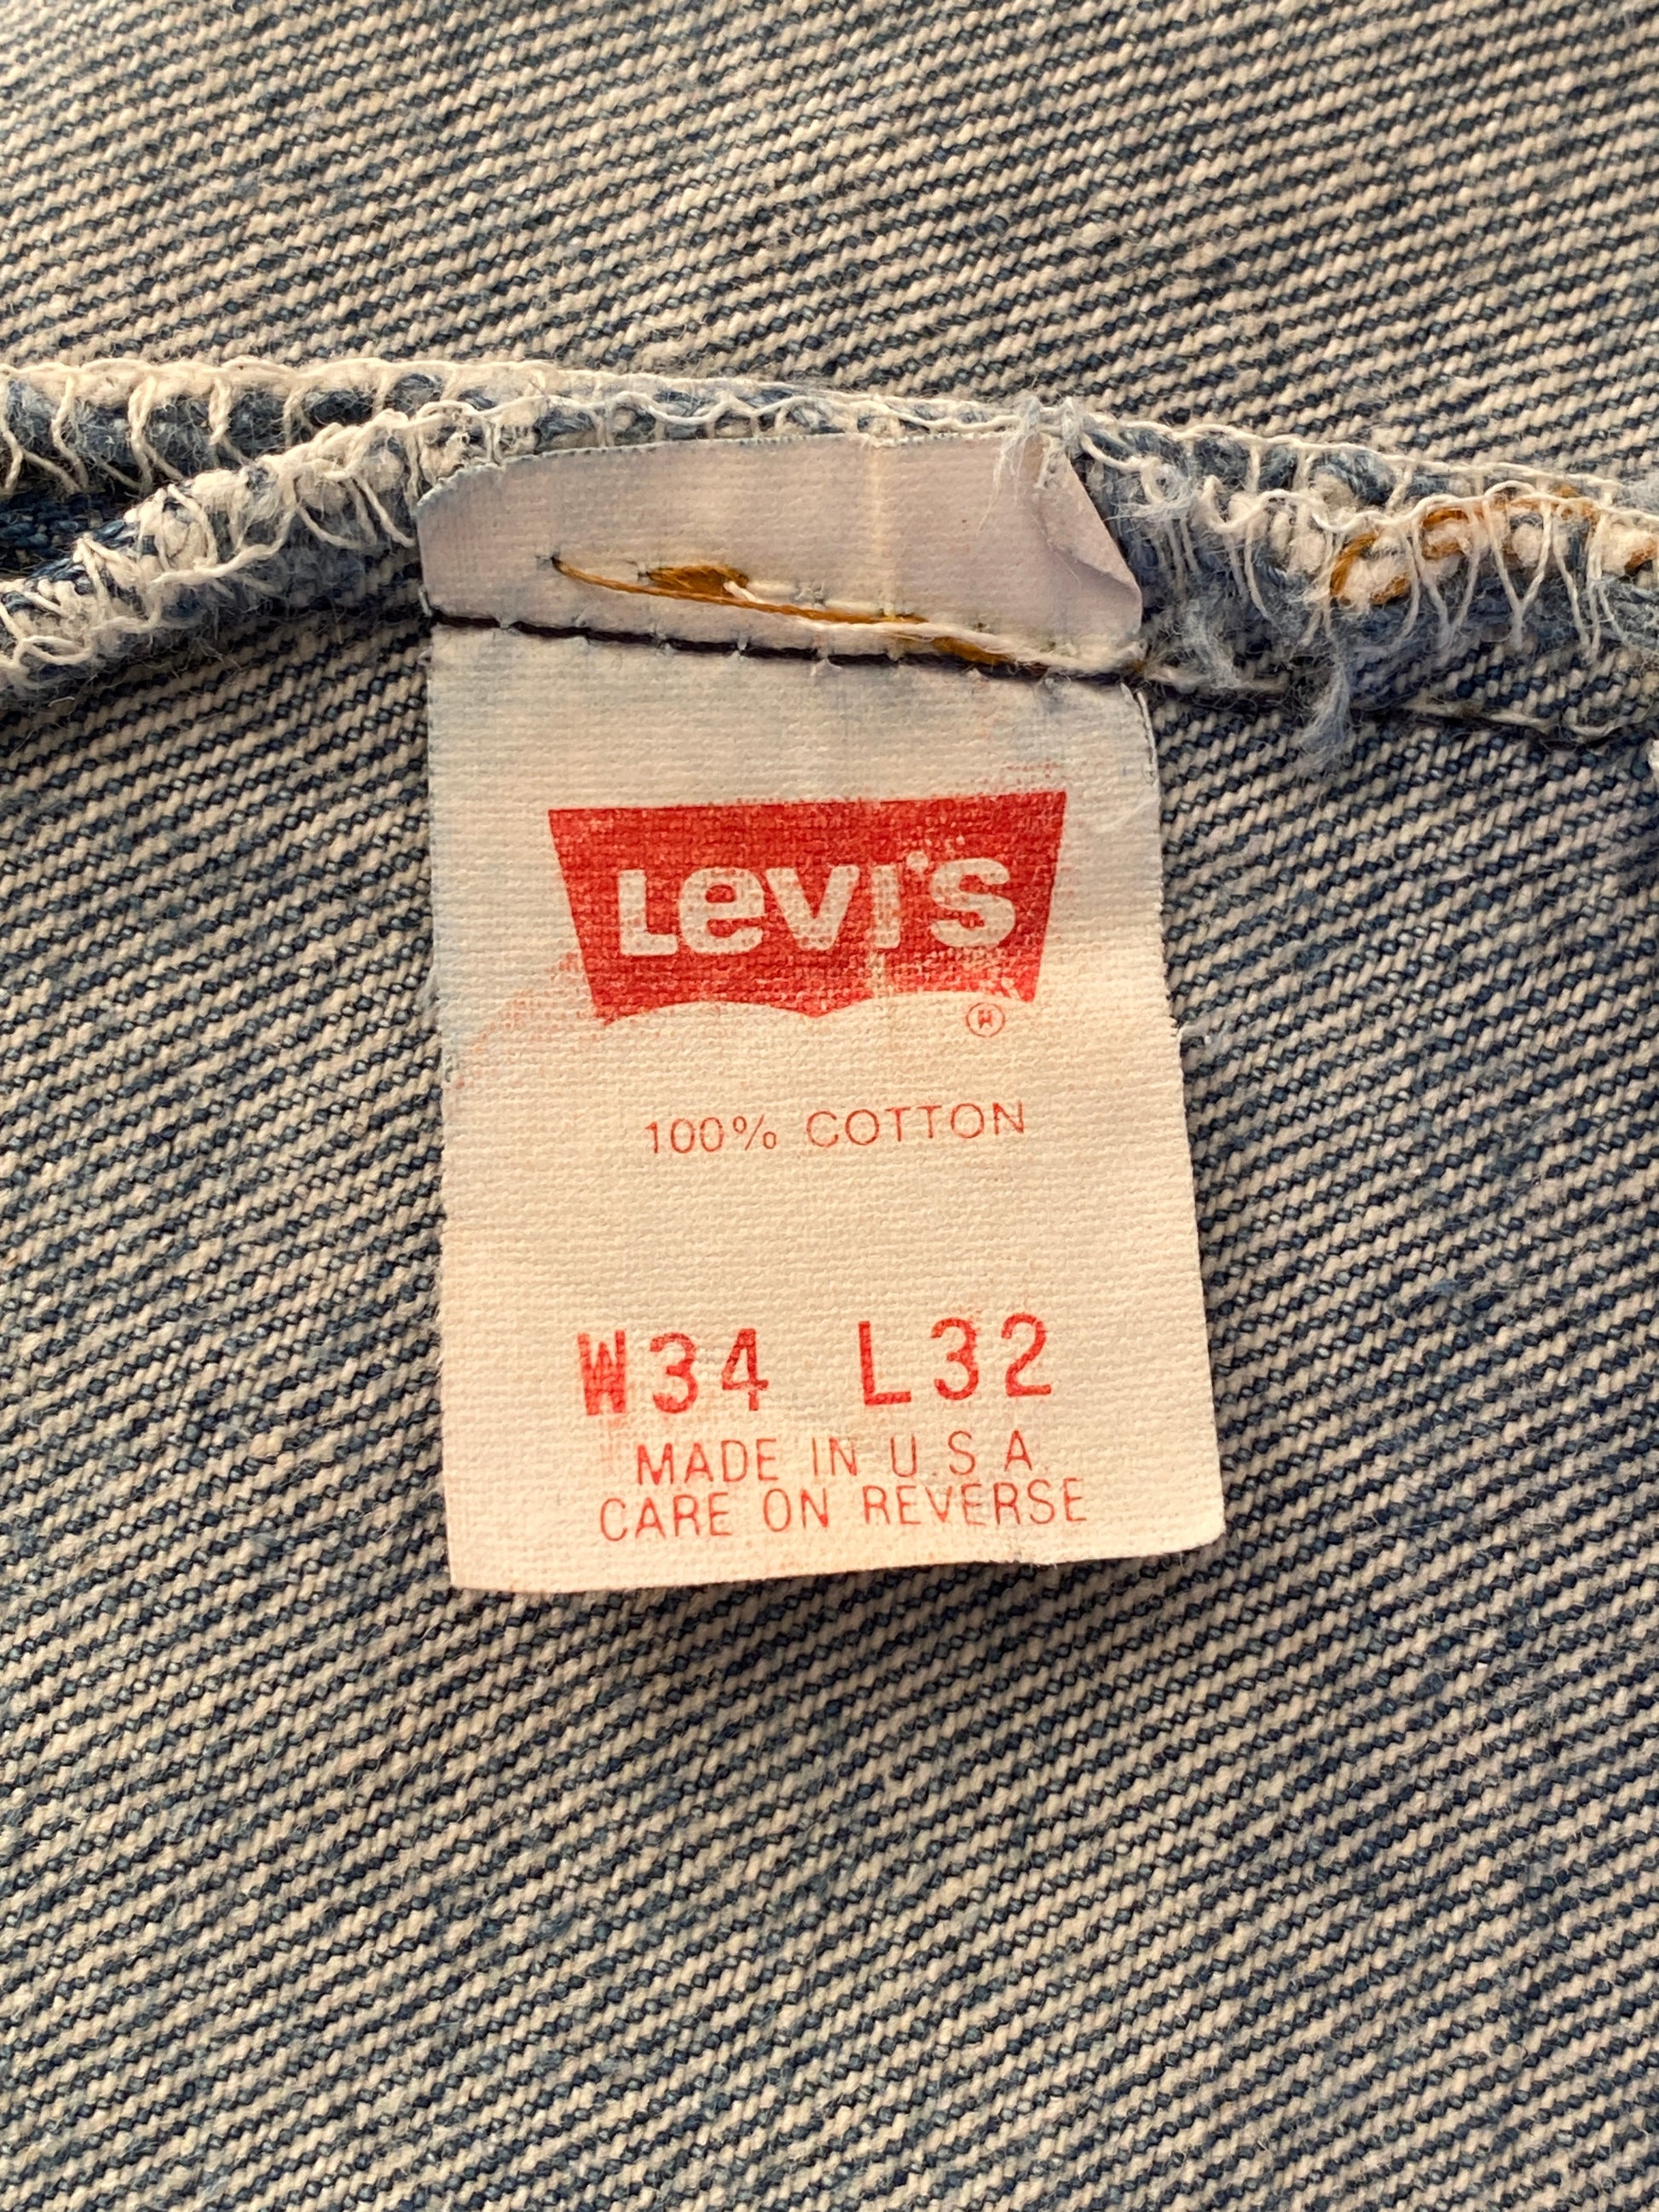 Vintage Levis 501 jeans from the 90s, size 34X32.